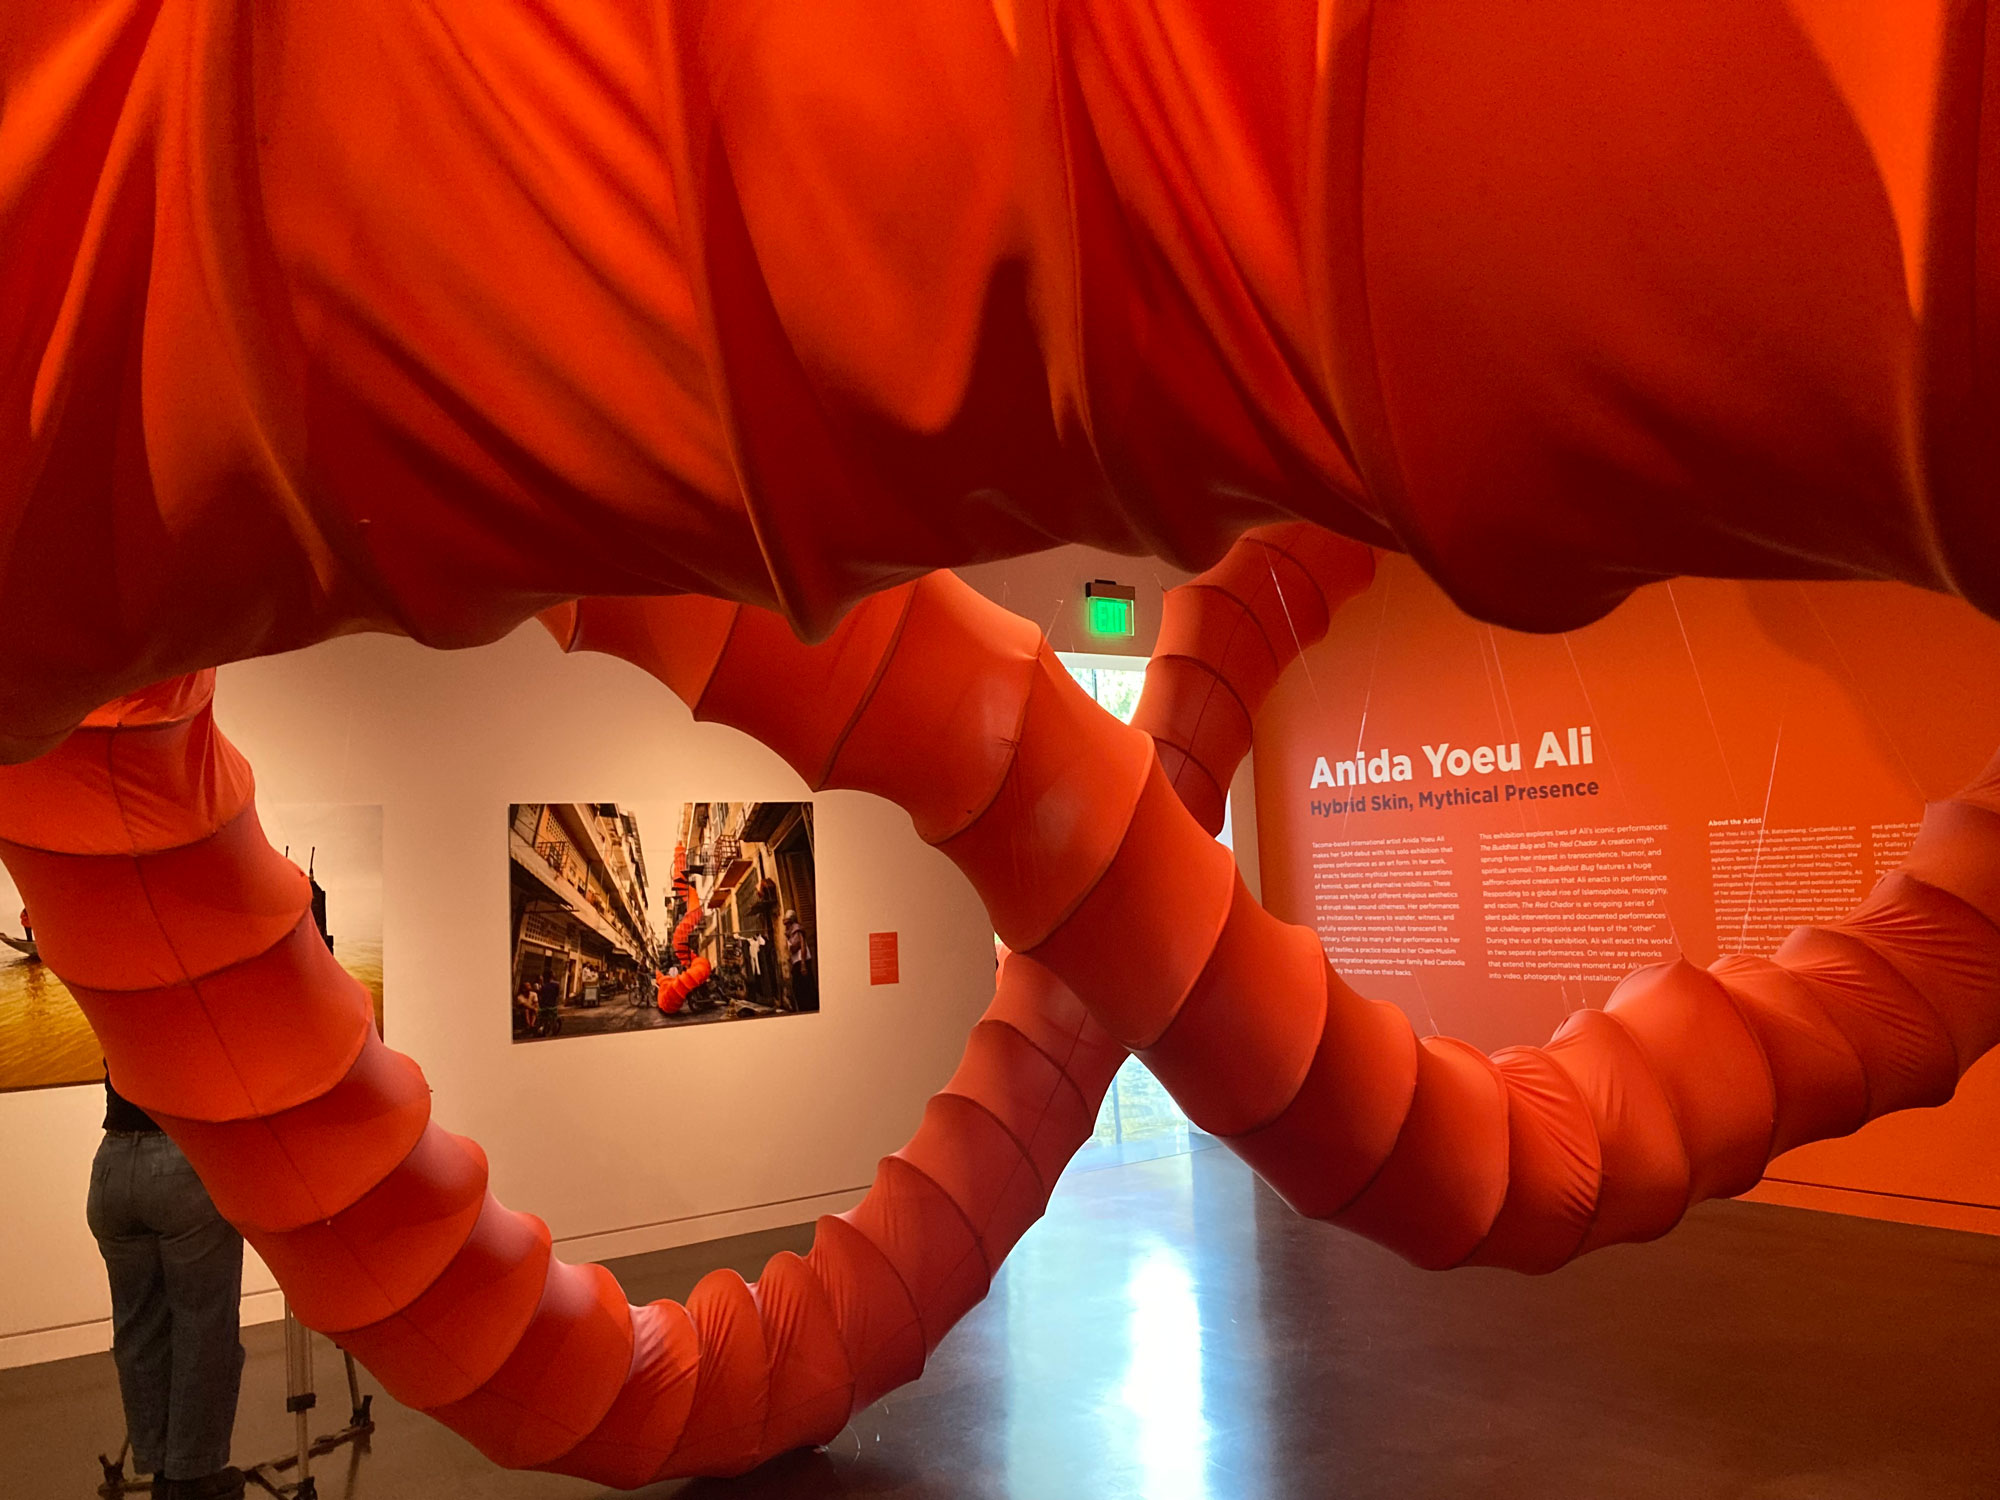 A large orange tube winds its way through a museum exhibit